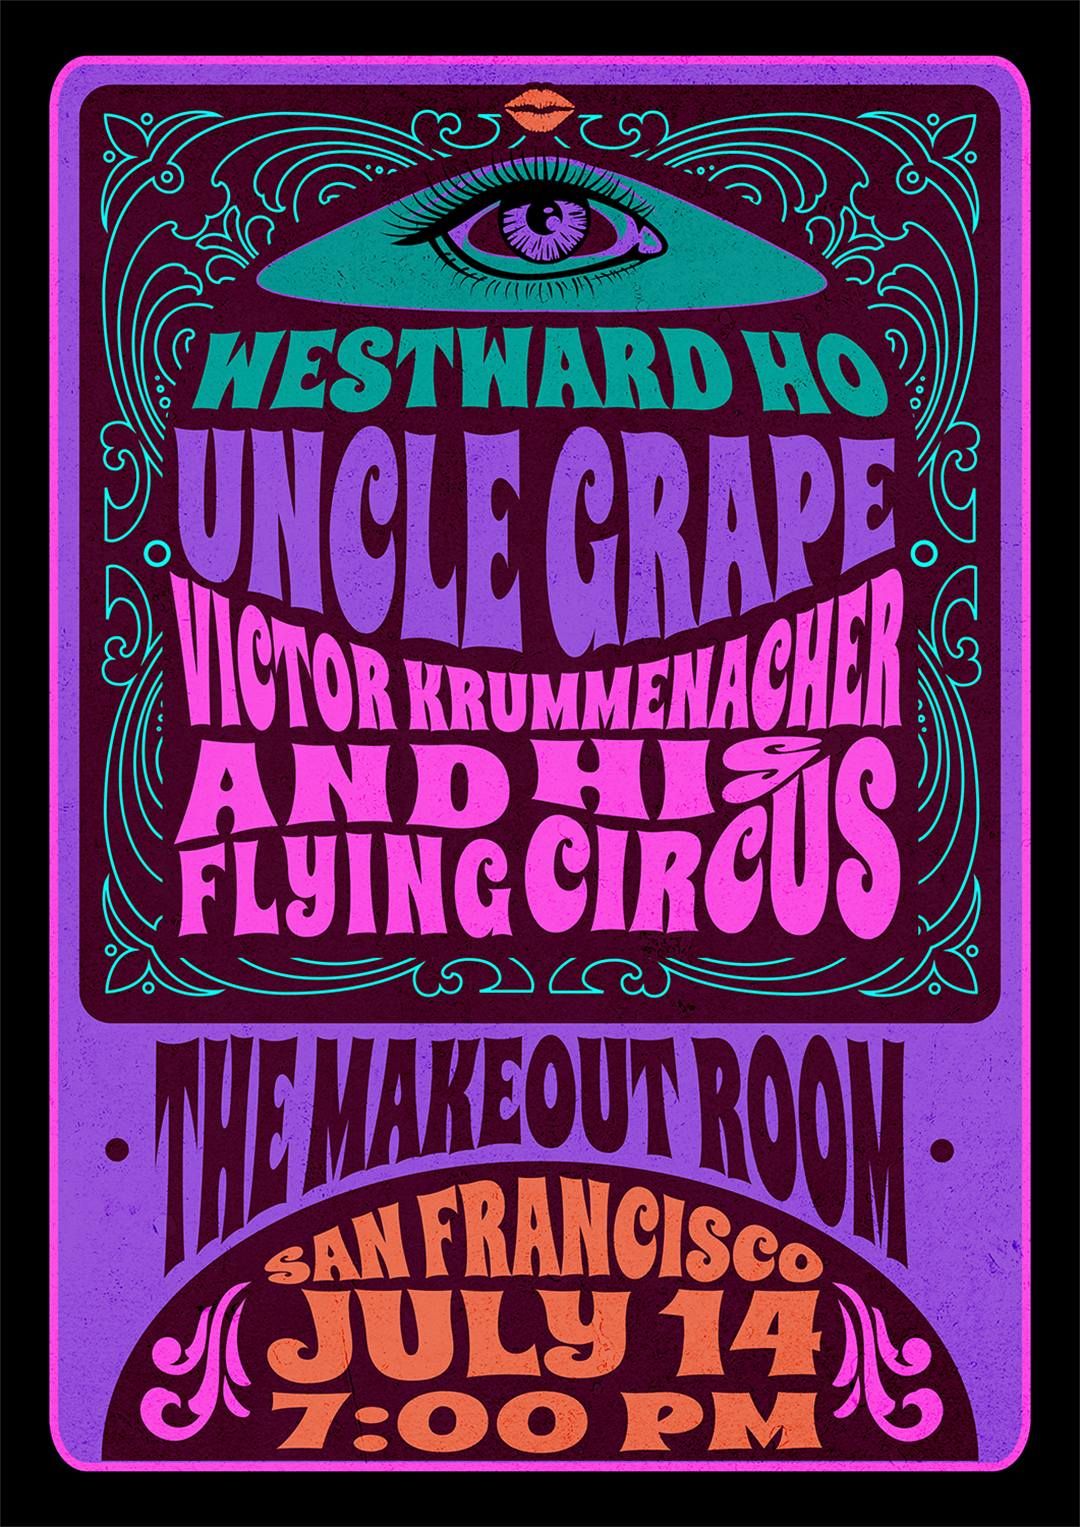 Uncle Grape, Victor Krummenacher's Flying Circus & Westward Ho at the Makeout Room